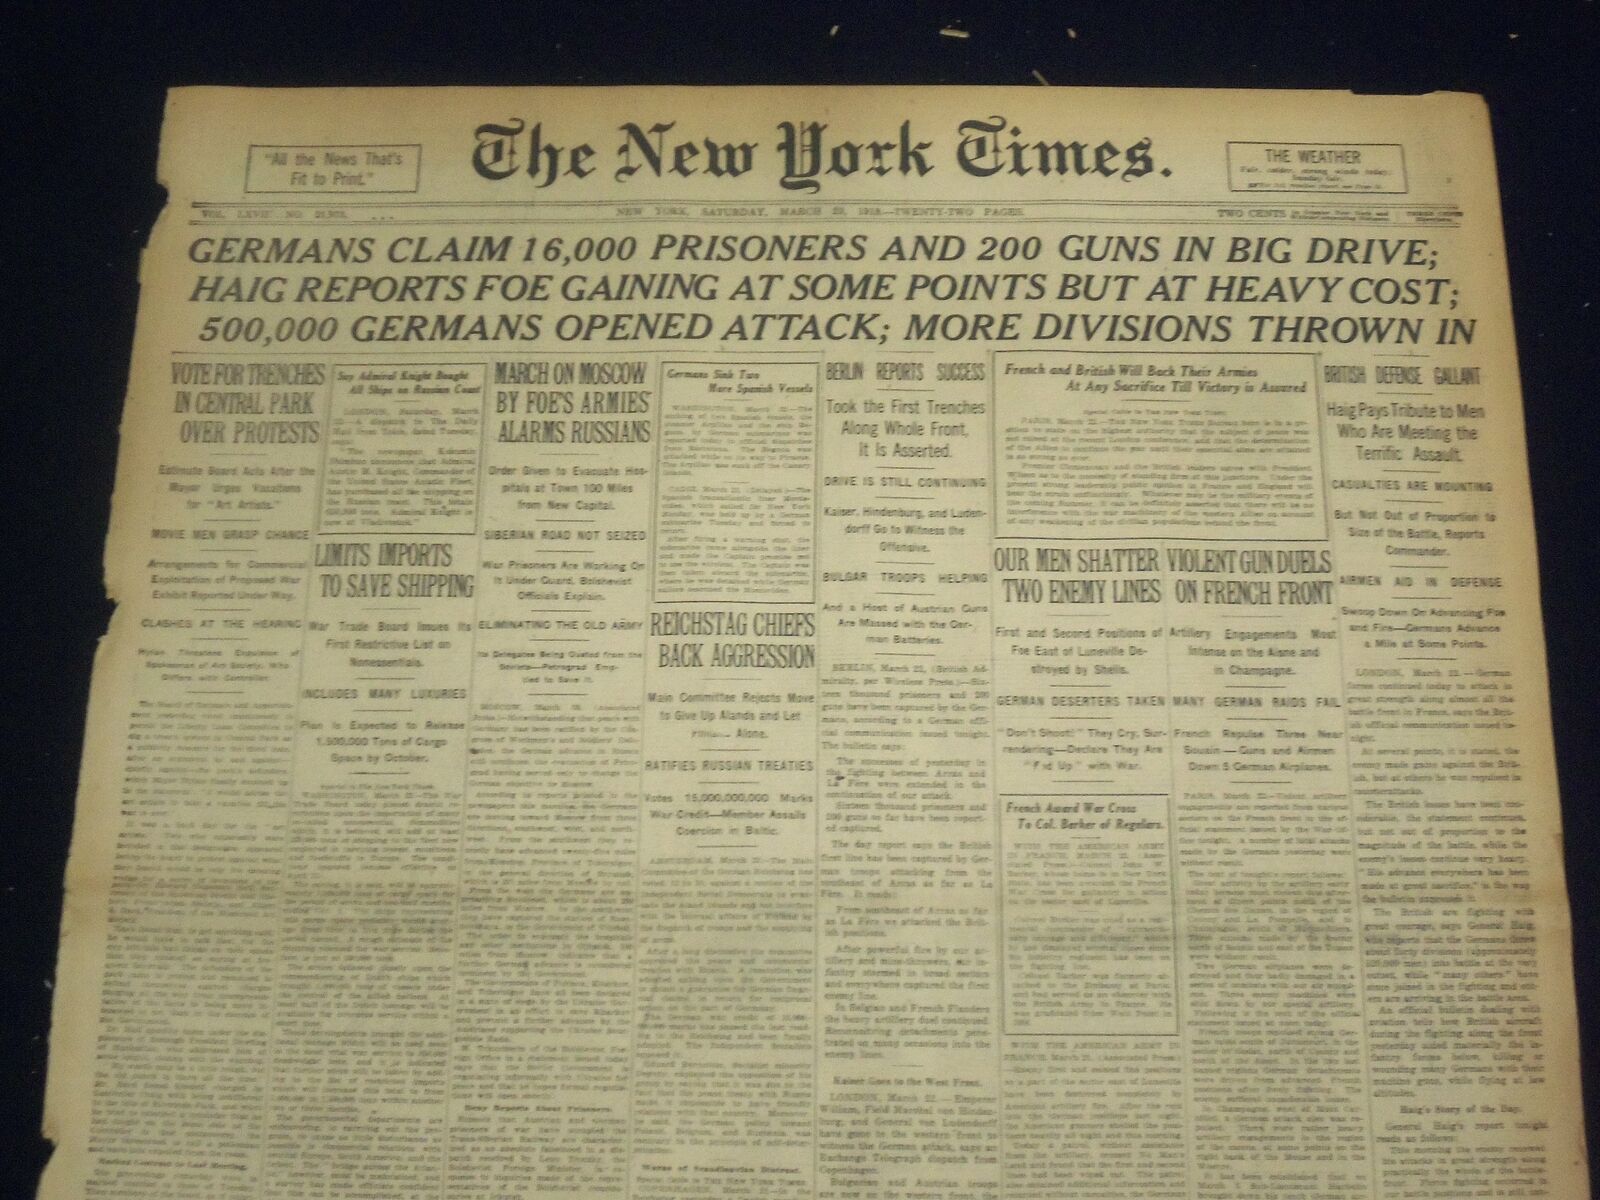 1918 MARCH 23 NEW YORK TIMES - GERMANS CLAIM 16,000 PRISONERS - NT 8162